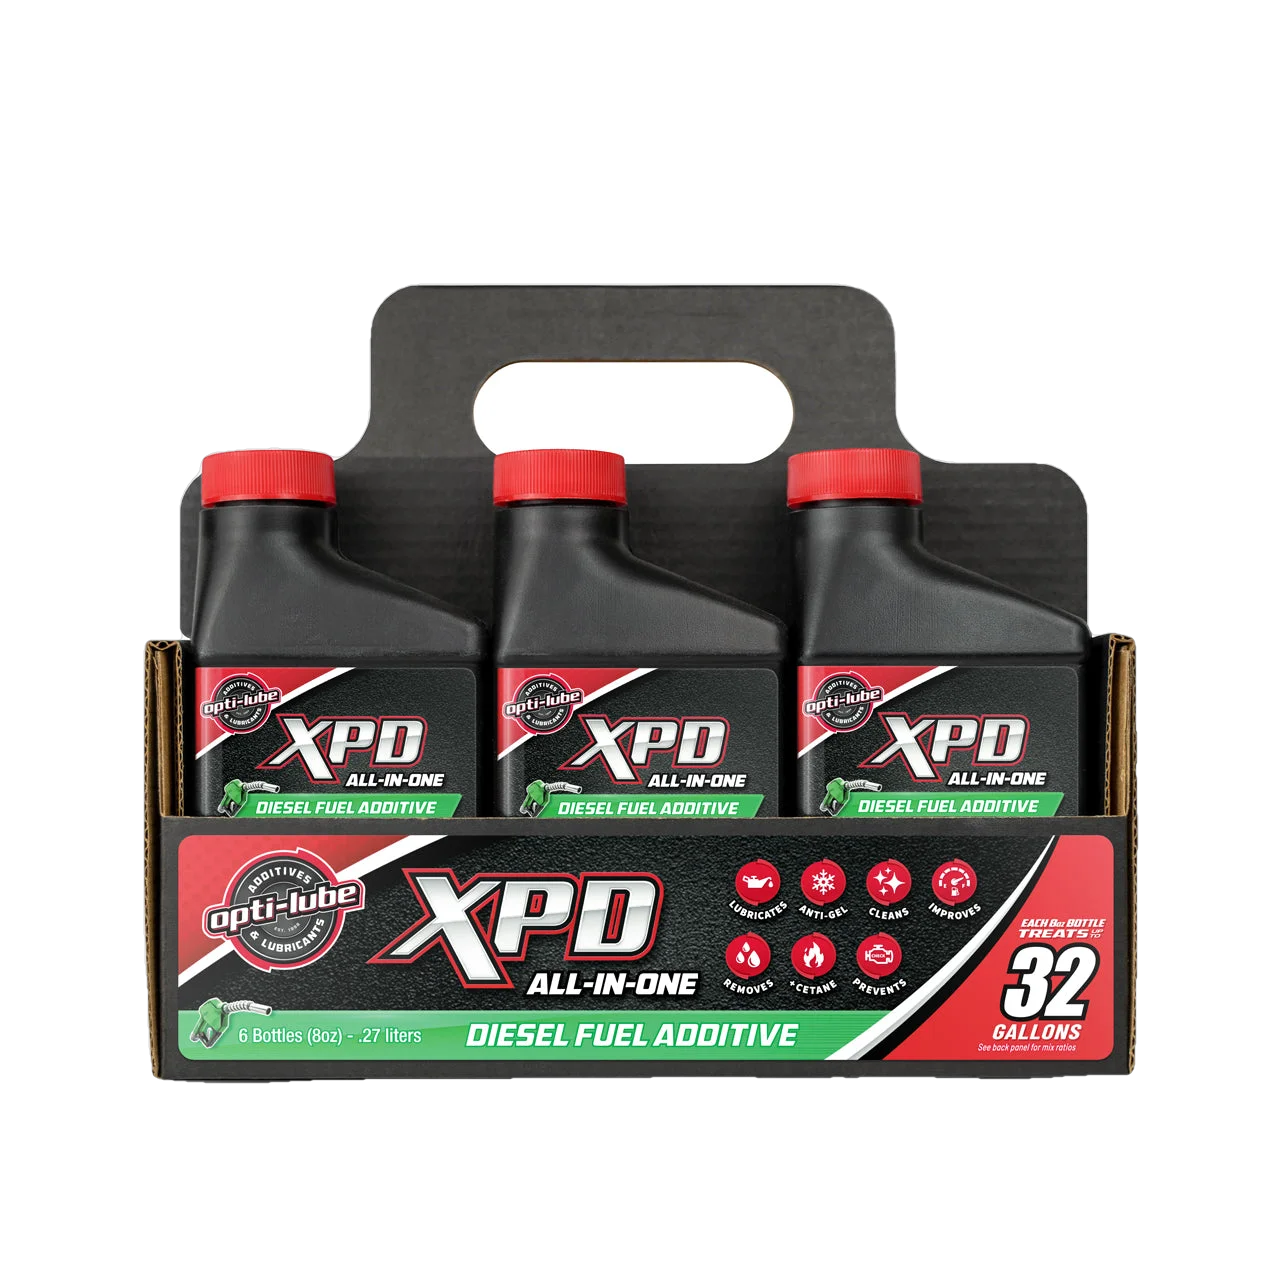 Opti-Lube XPD All-In-One Diesel Fuel Additive: 8oz 6 pack, Treats up to 32 Gallons per 8oz bottle